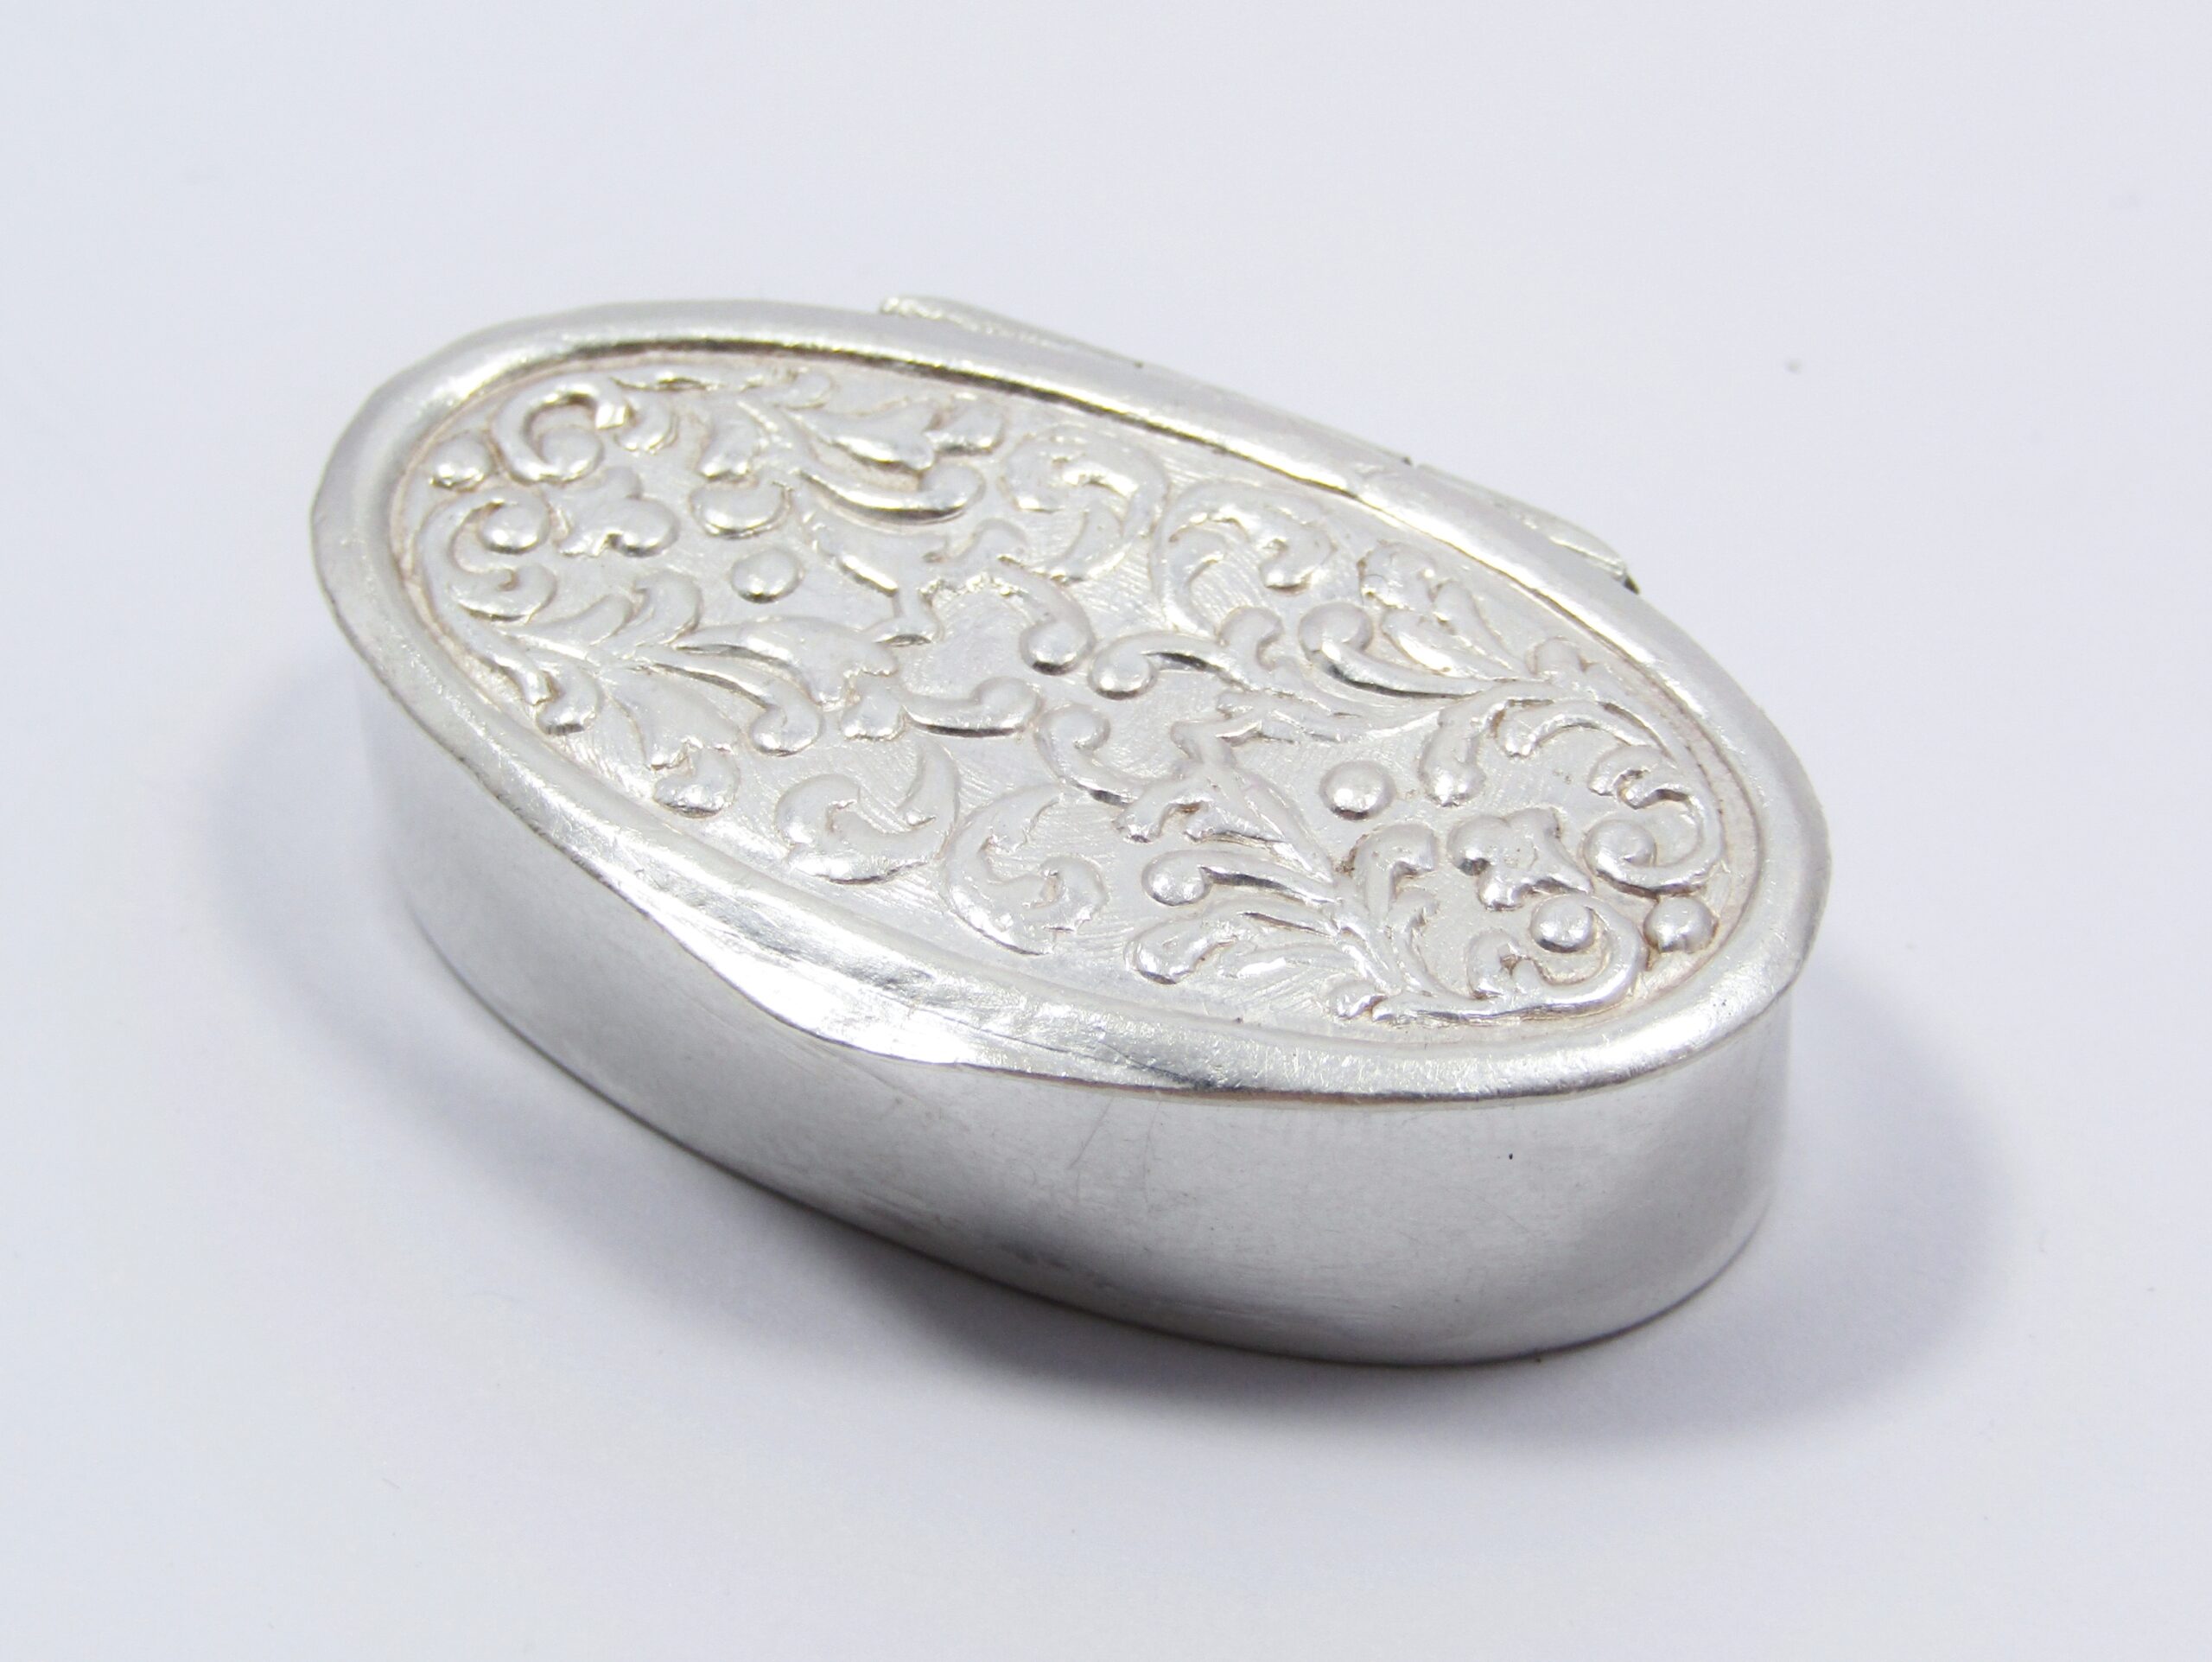 A Lovely Oval Decorative Pill Box in Sterling Silver.